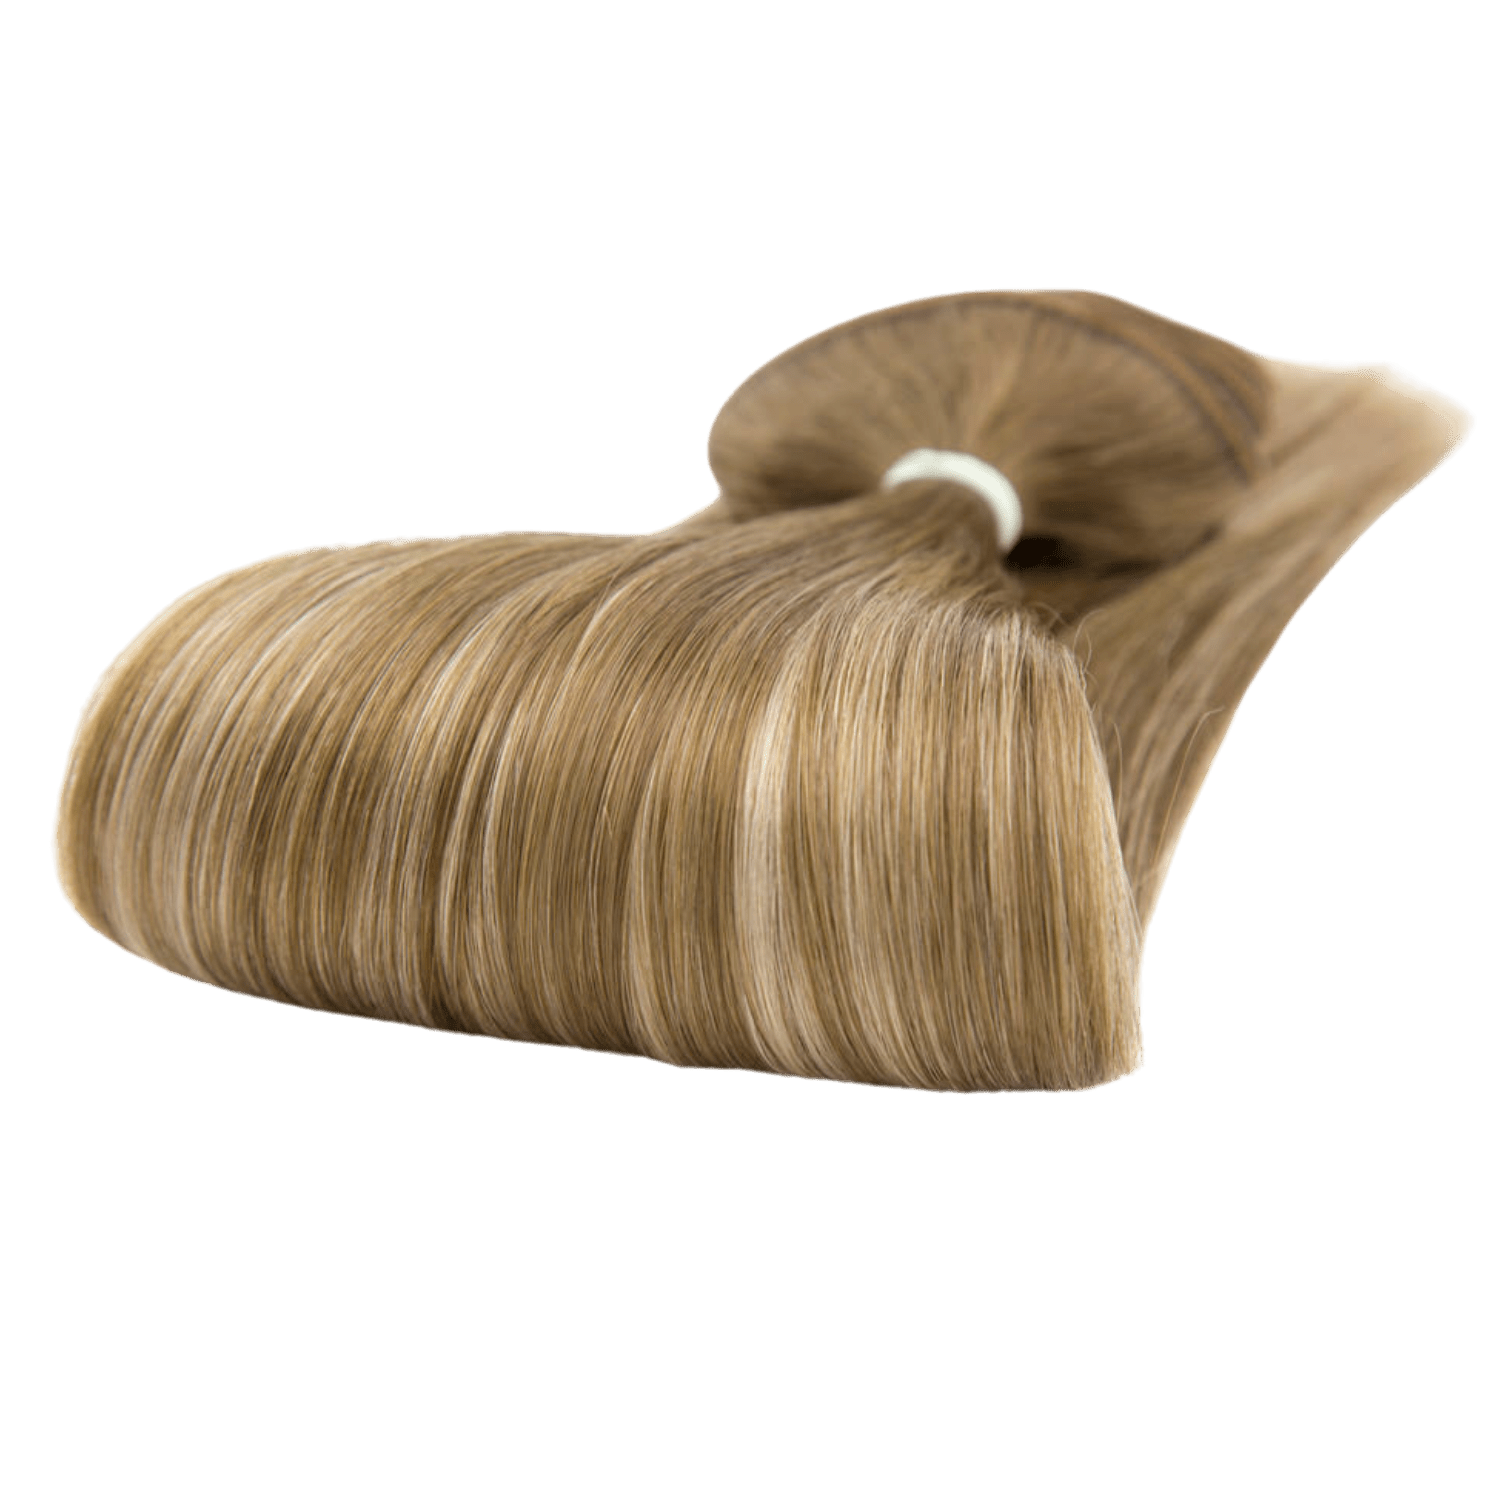 14" Bohyme Luxe - Machine Tied Weft - Silky Straight - 1 - BL-ST-14-1